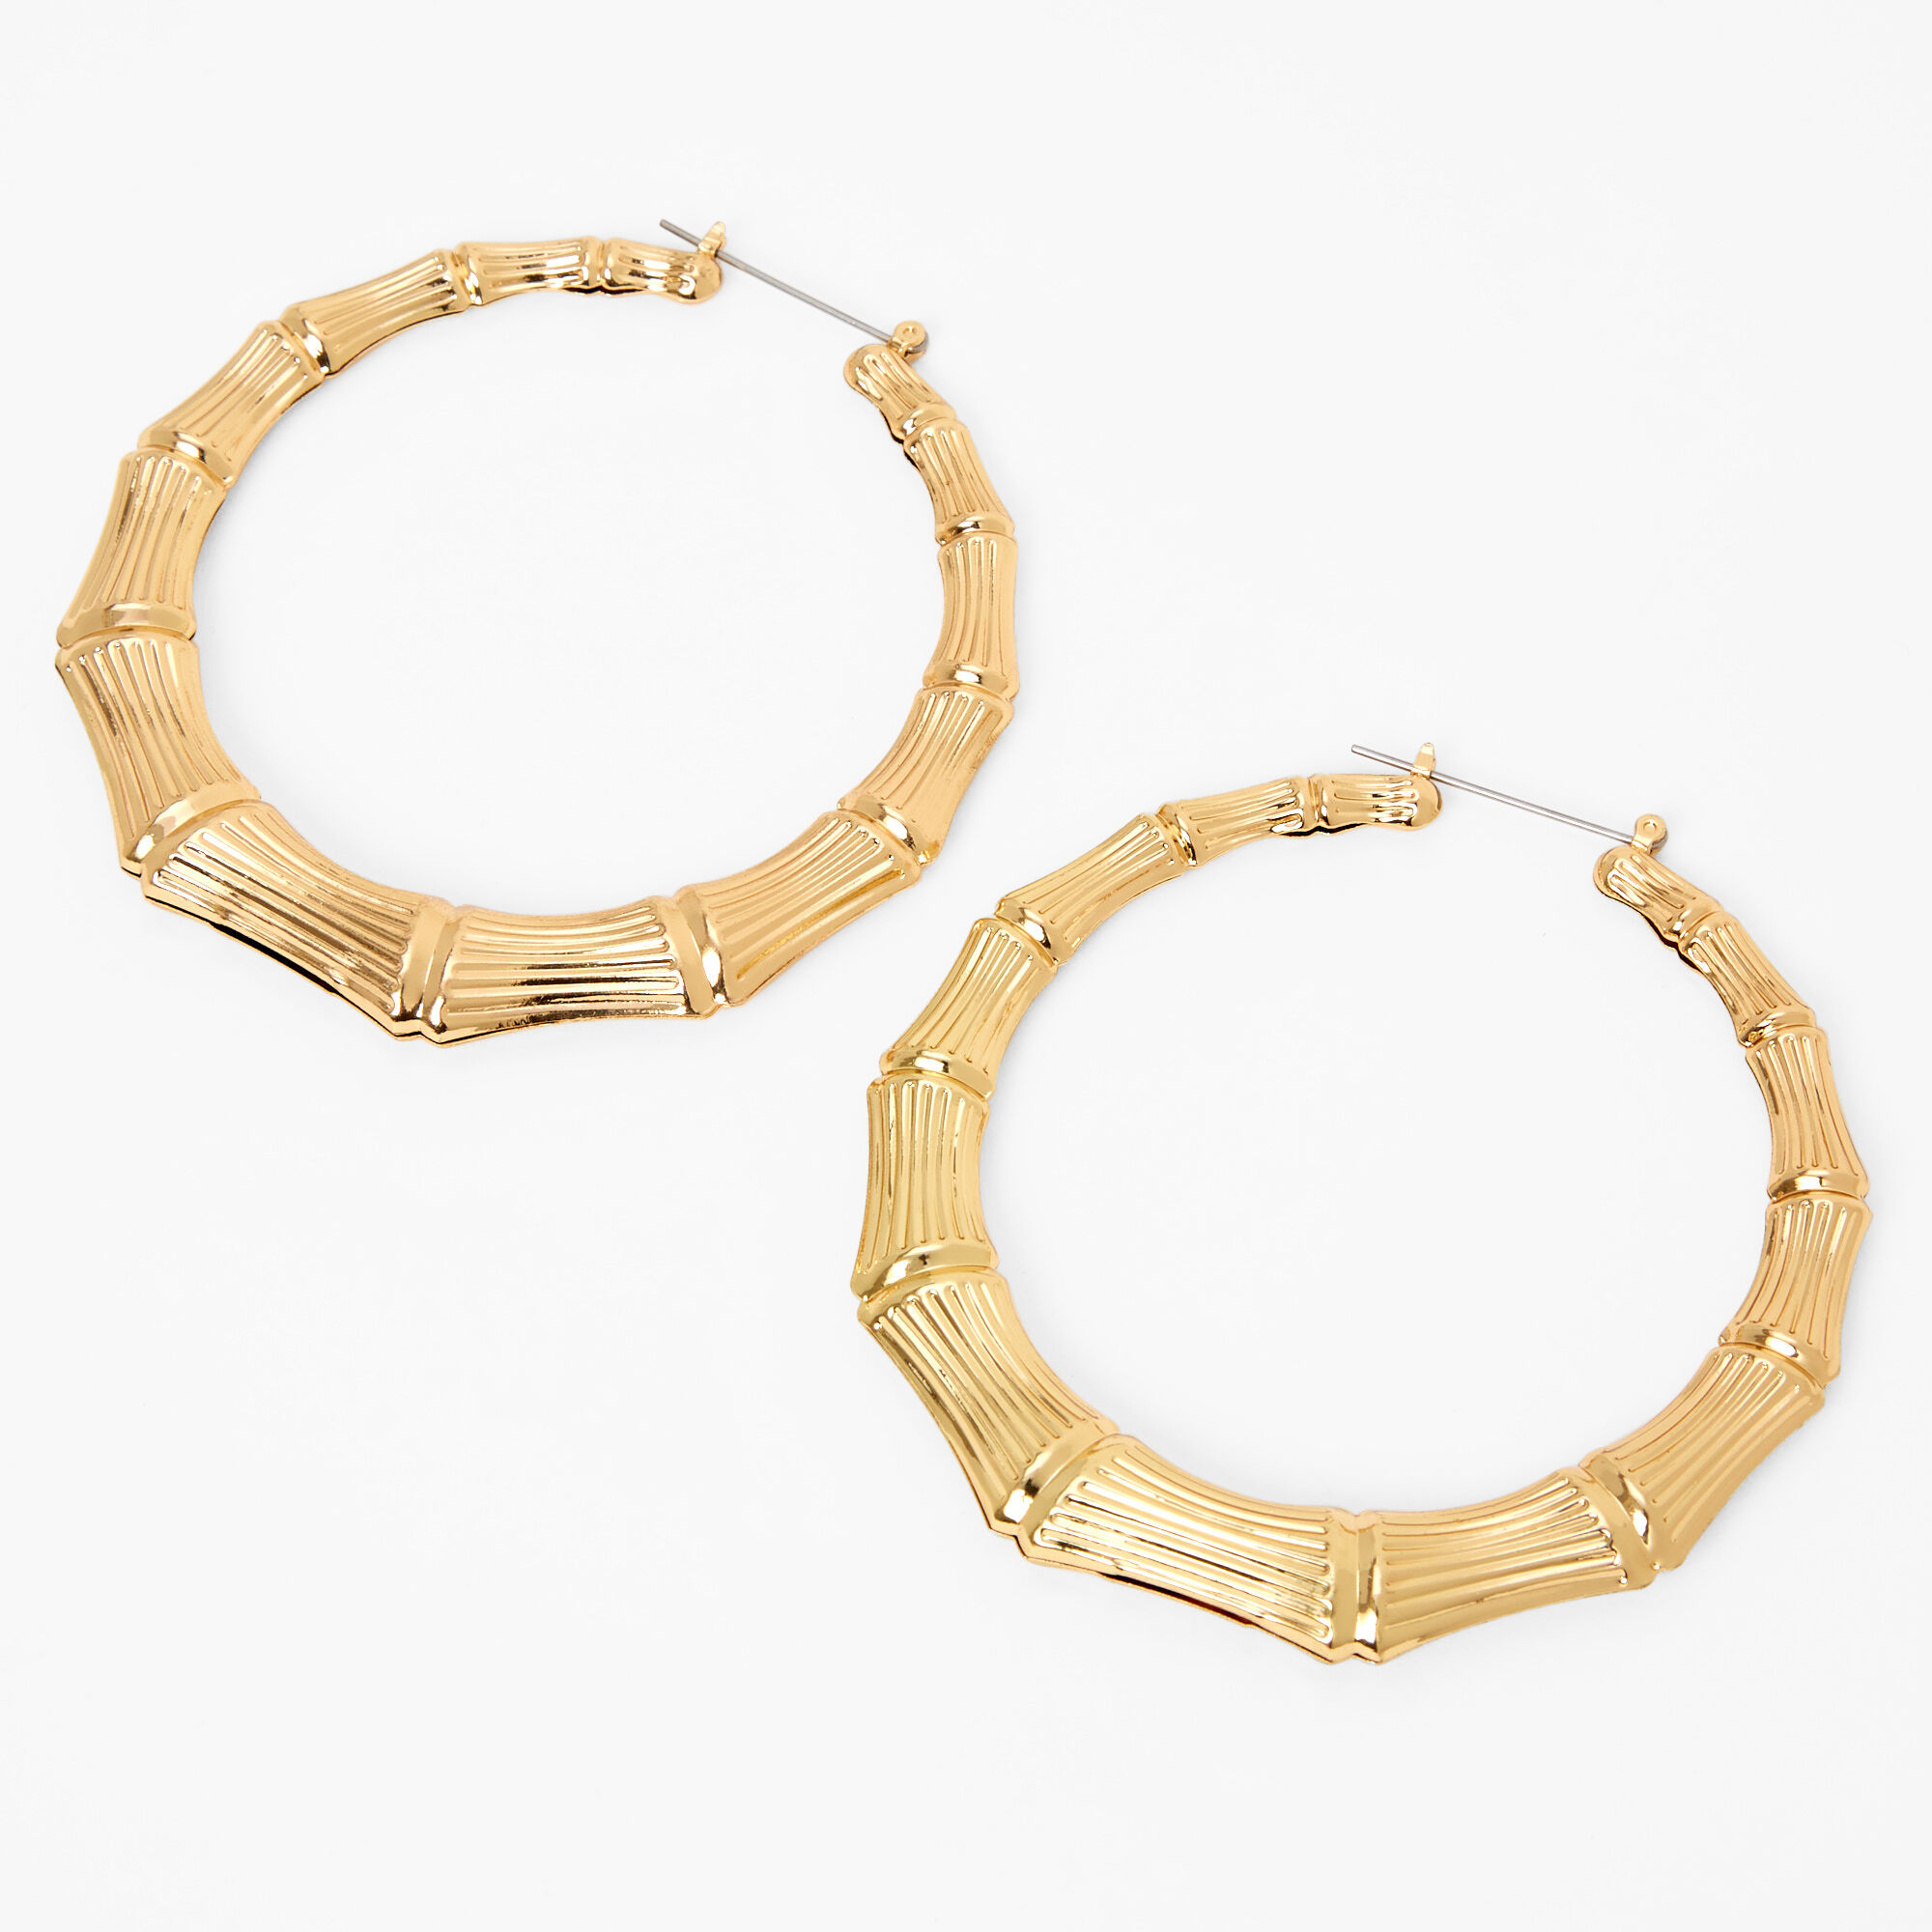 Bamboo Style Hoop Earrings, 3.0 (80MM) Gold (12 Pairs)